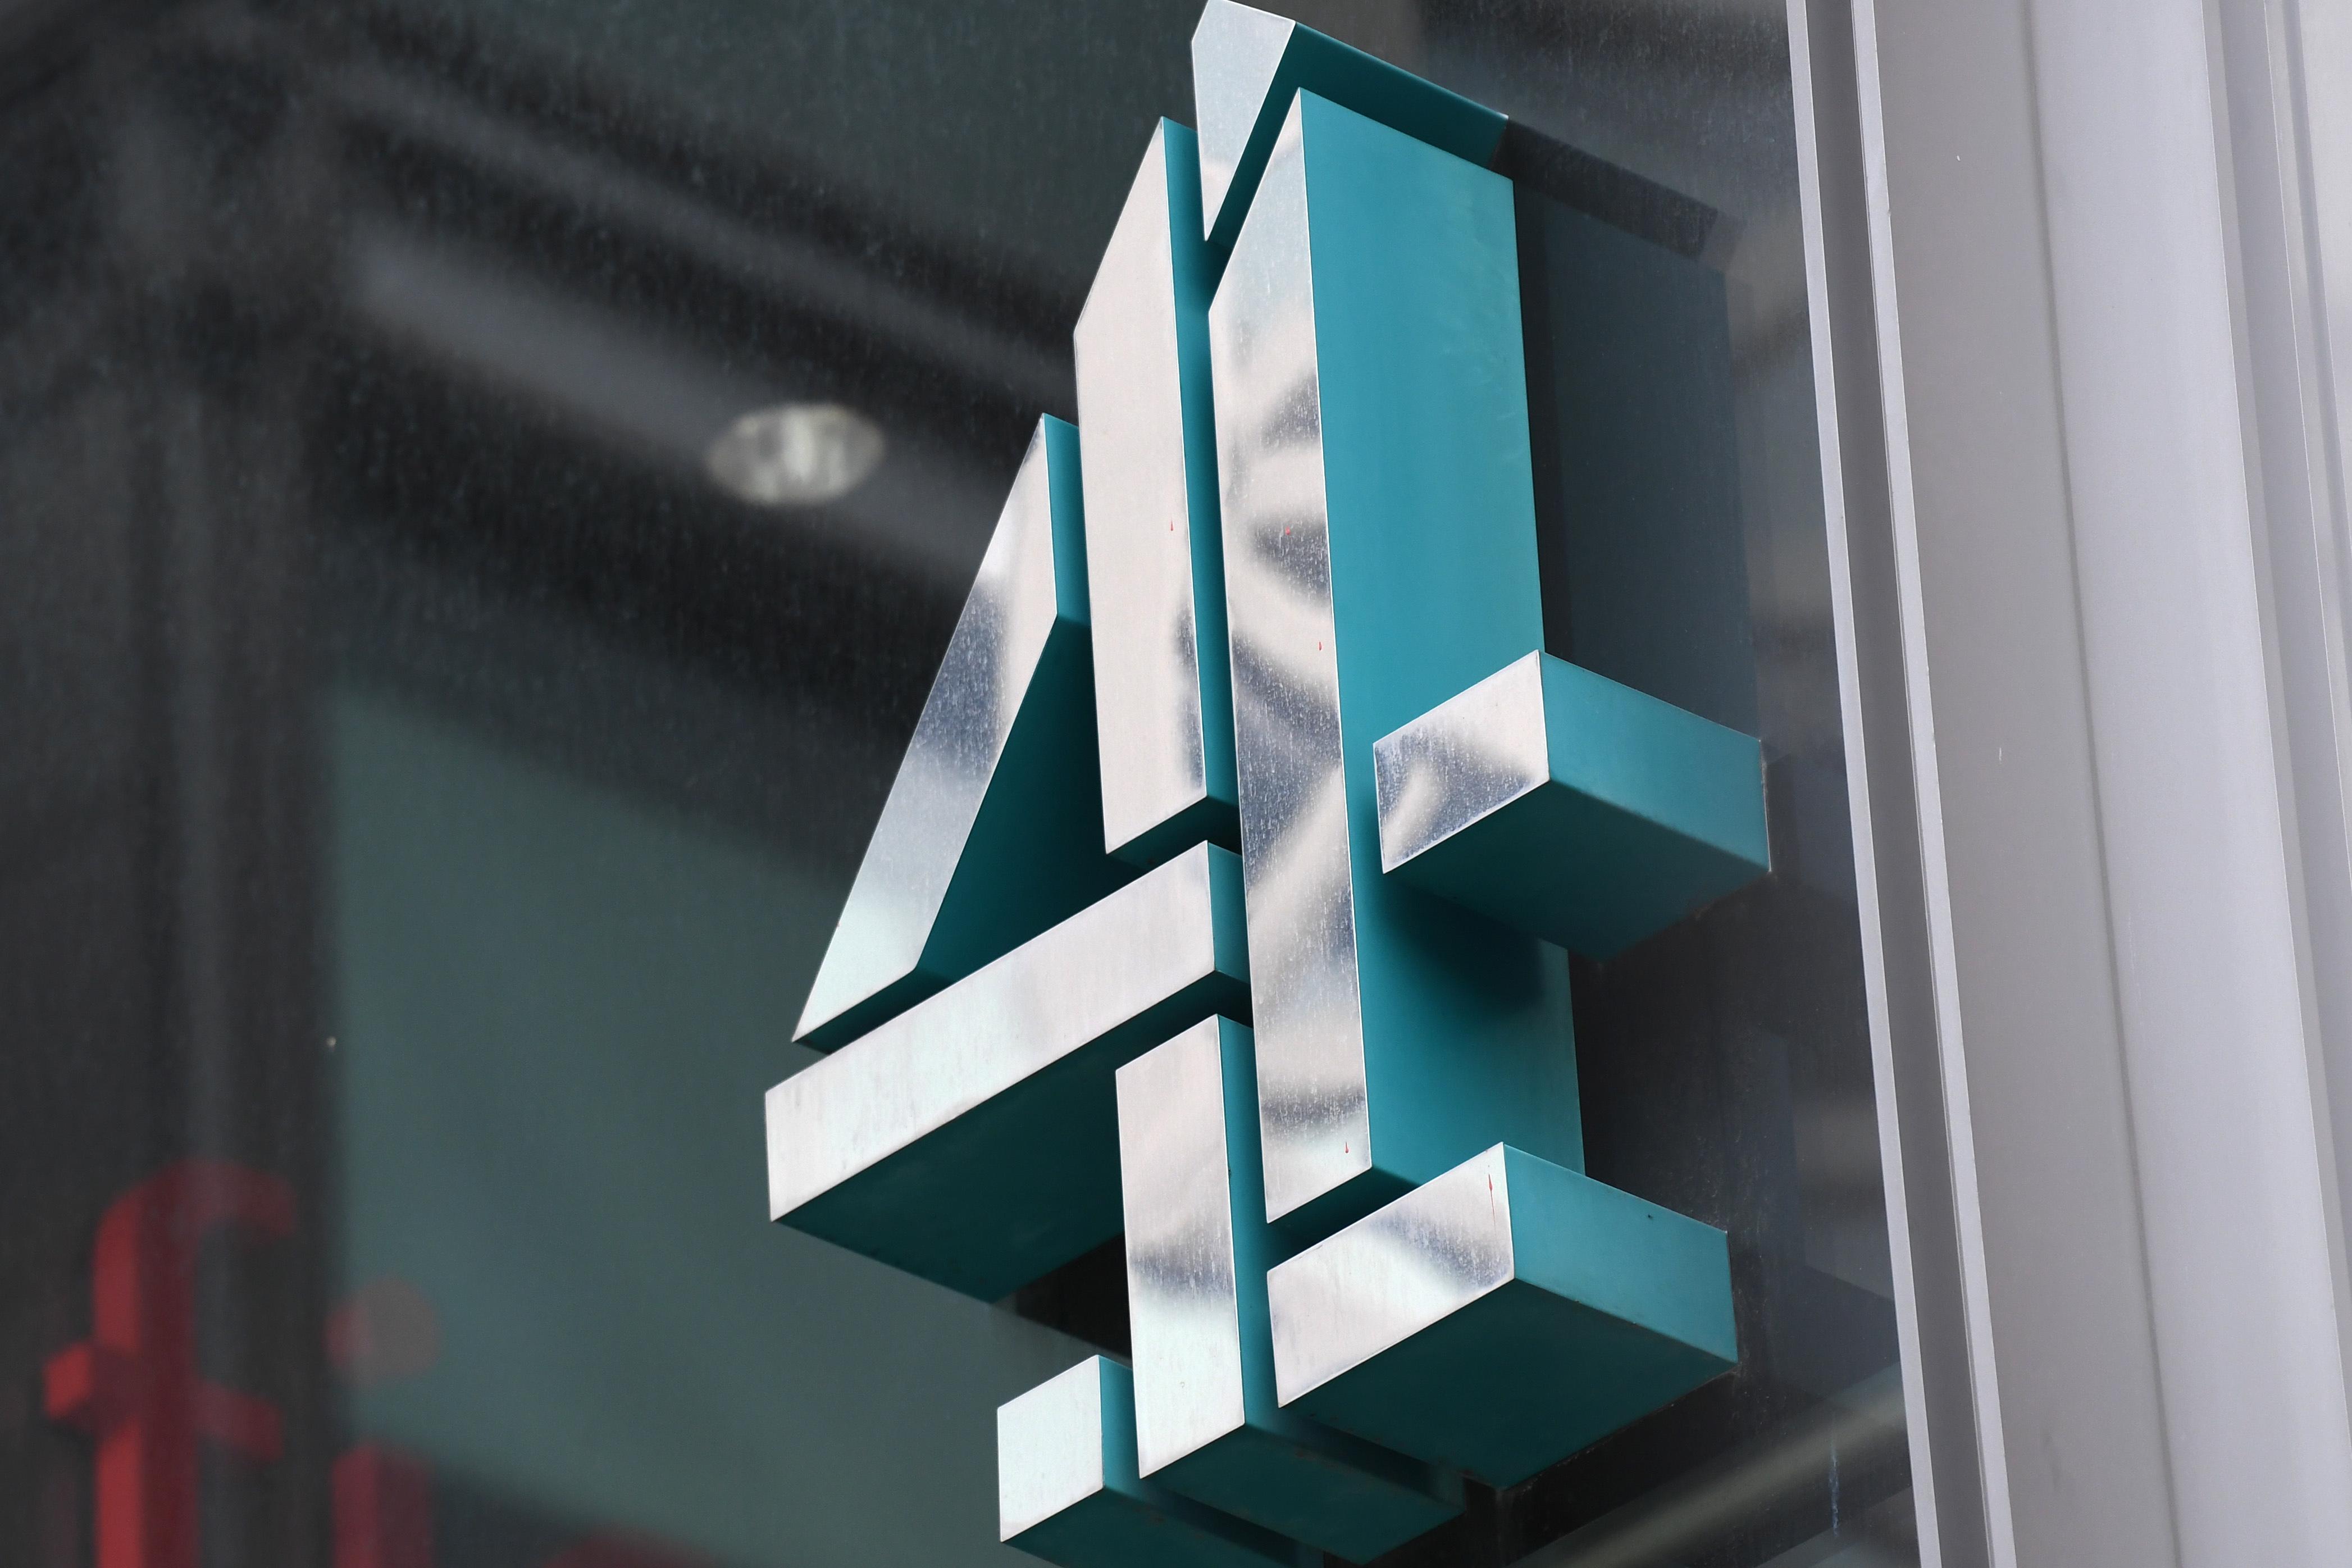 C4 logo on wall of building 